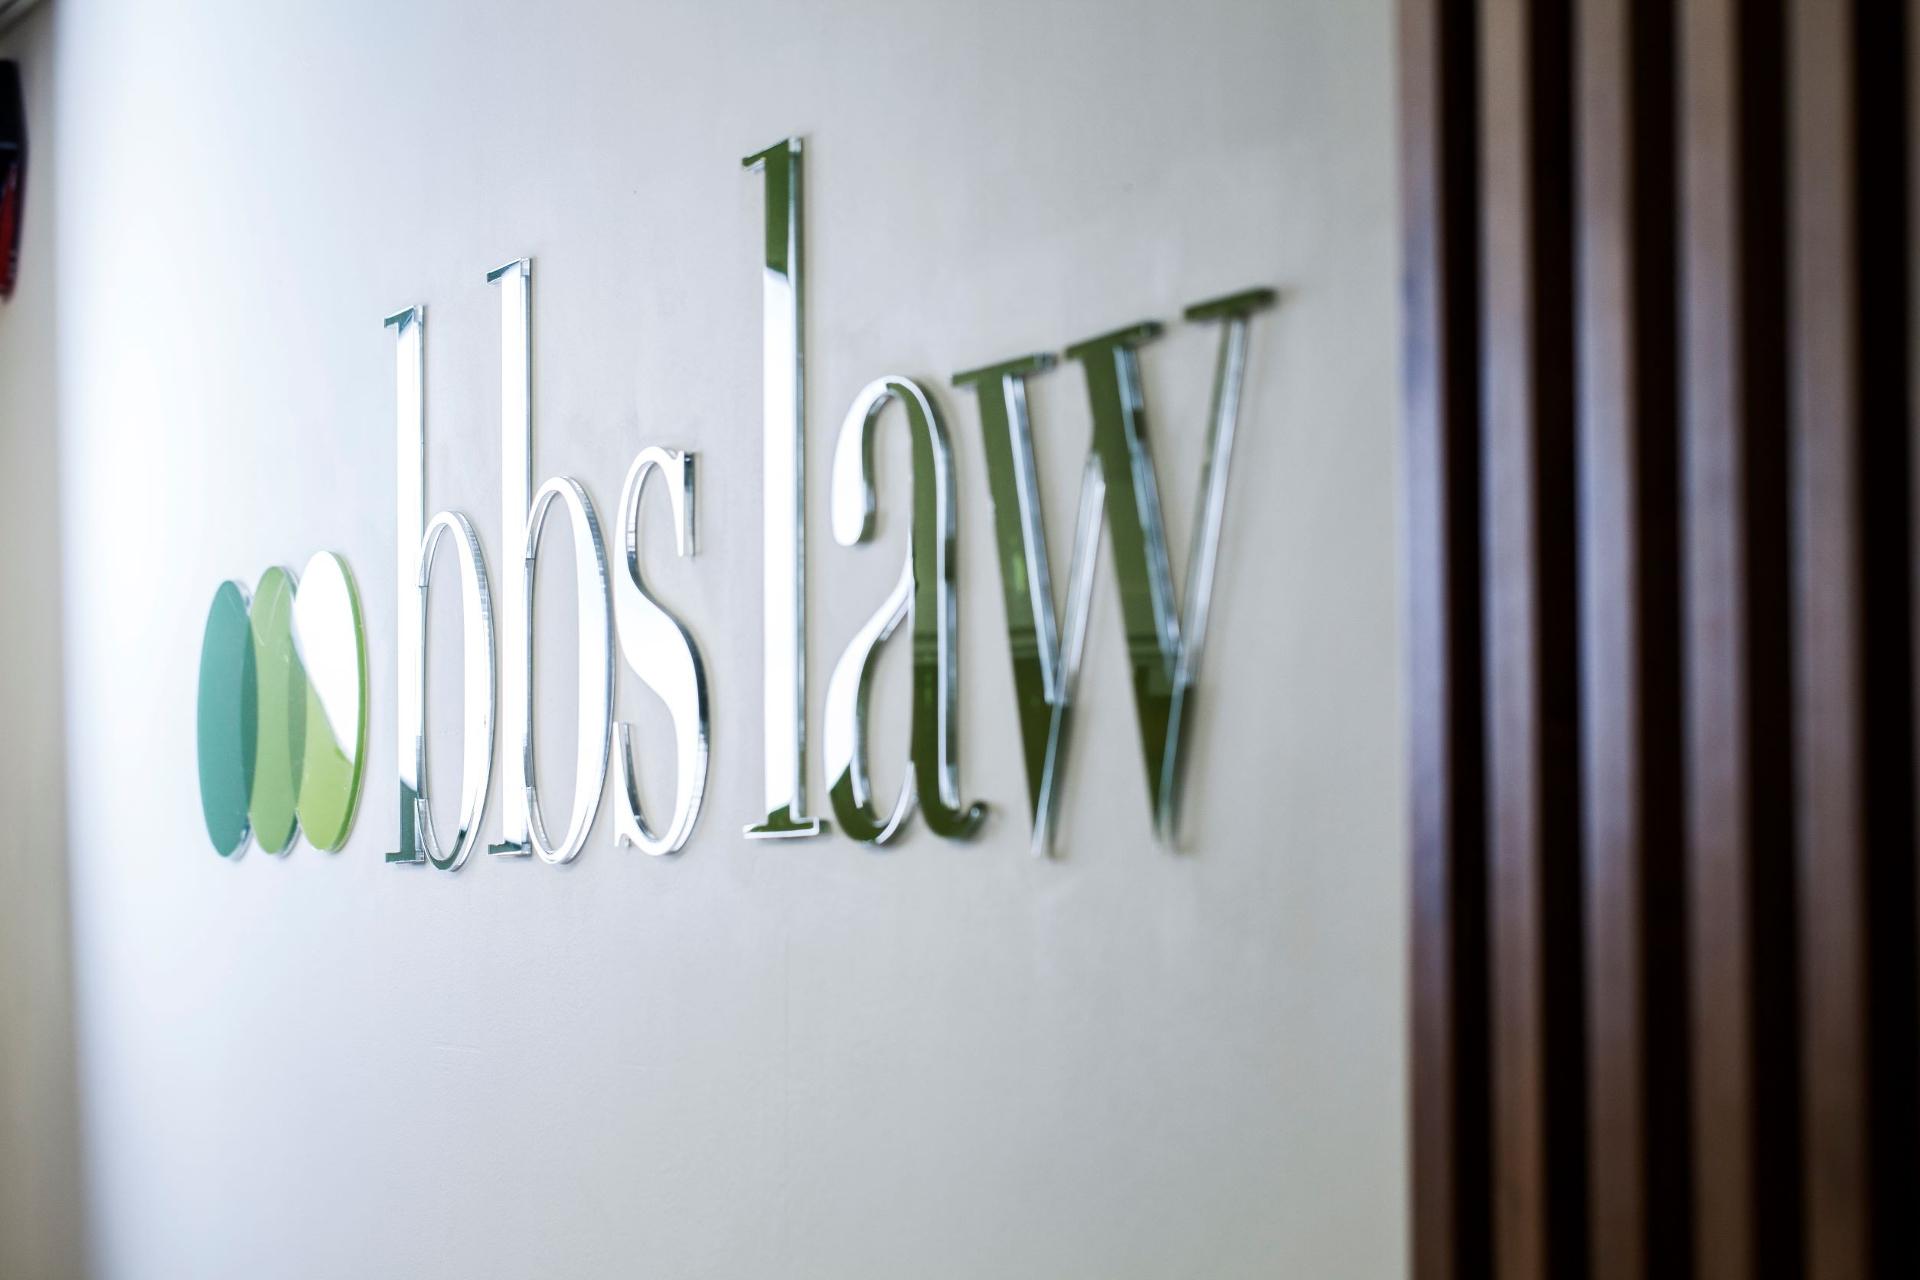 Law firm to continue exploring opportunities following acquisition